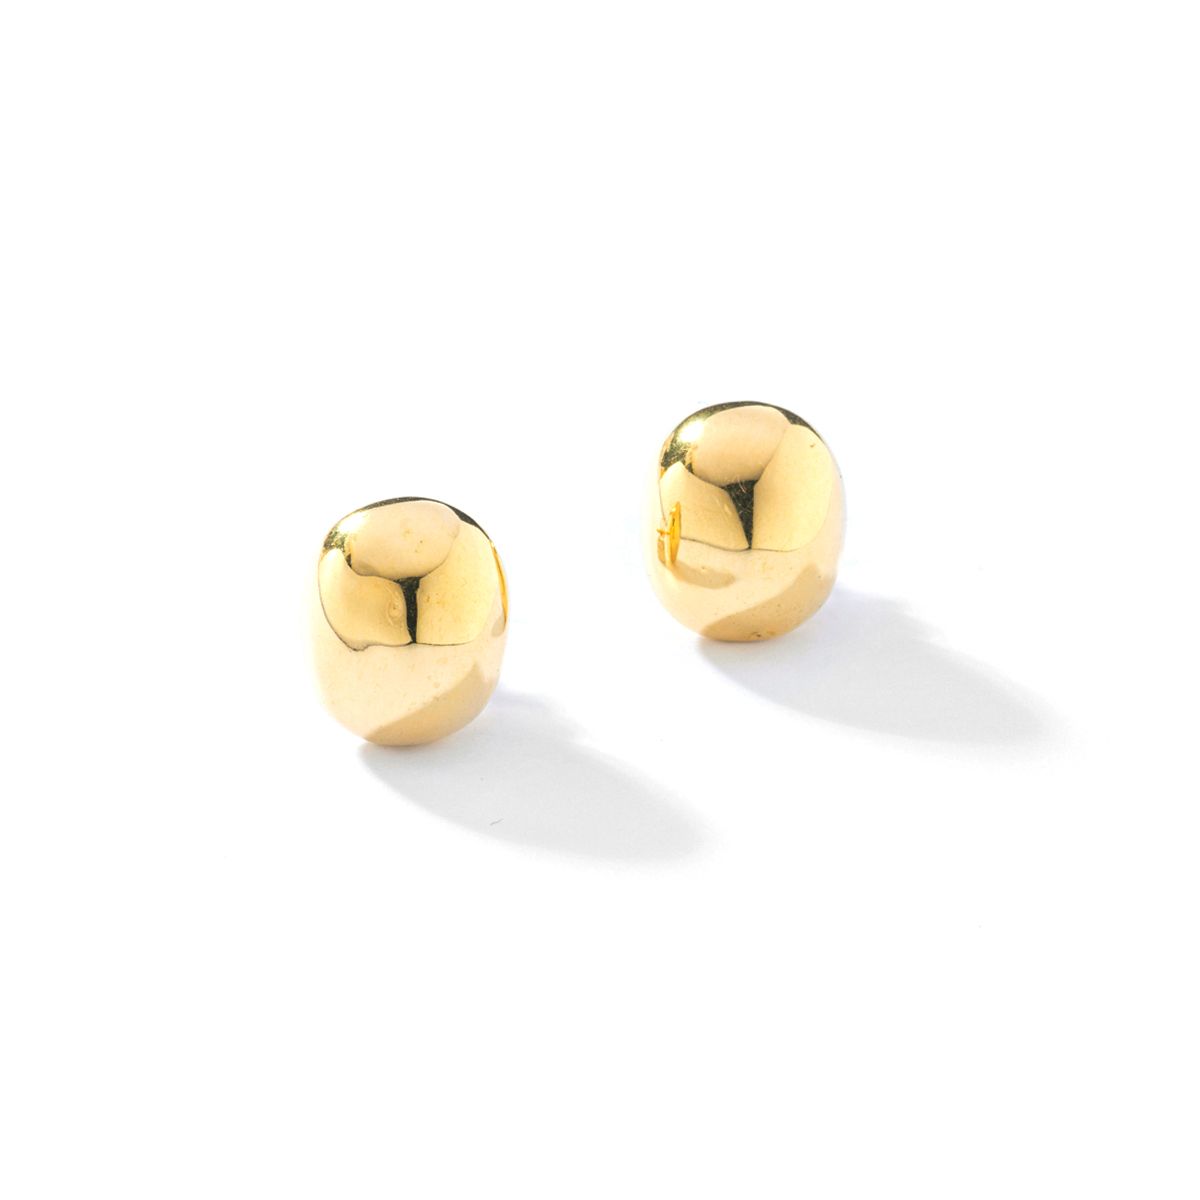 Null 18 ct yellow gold ovoid earrings 

Length : 15 mm

weight : 10,90 g